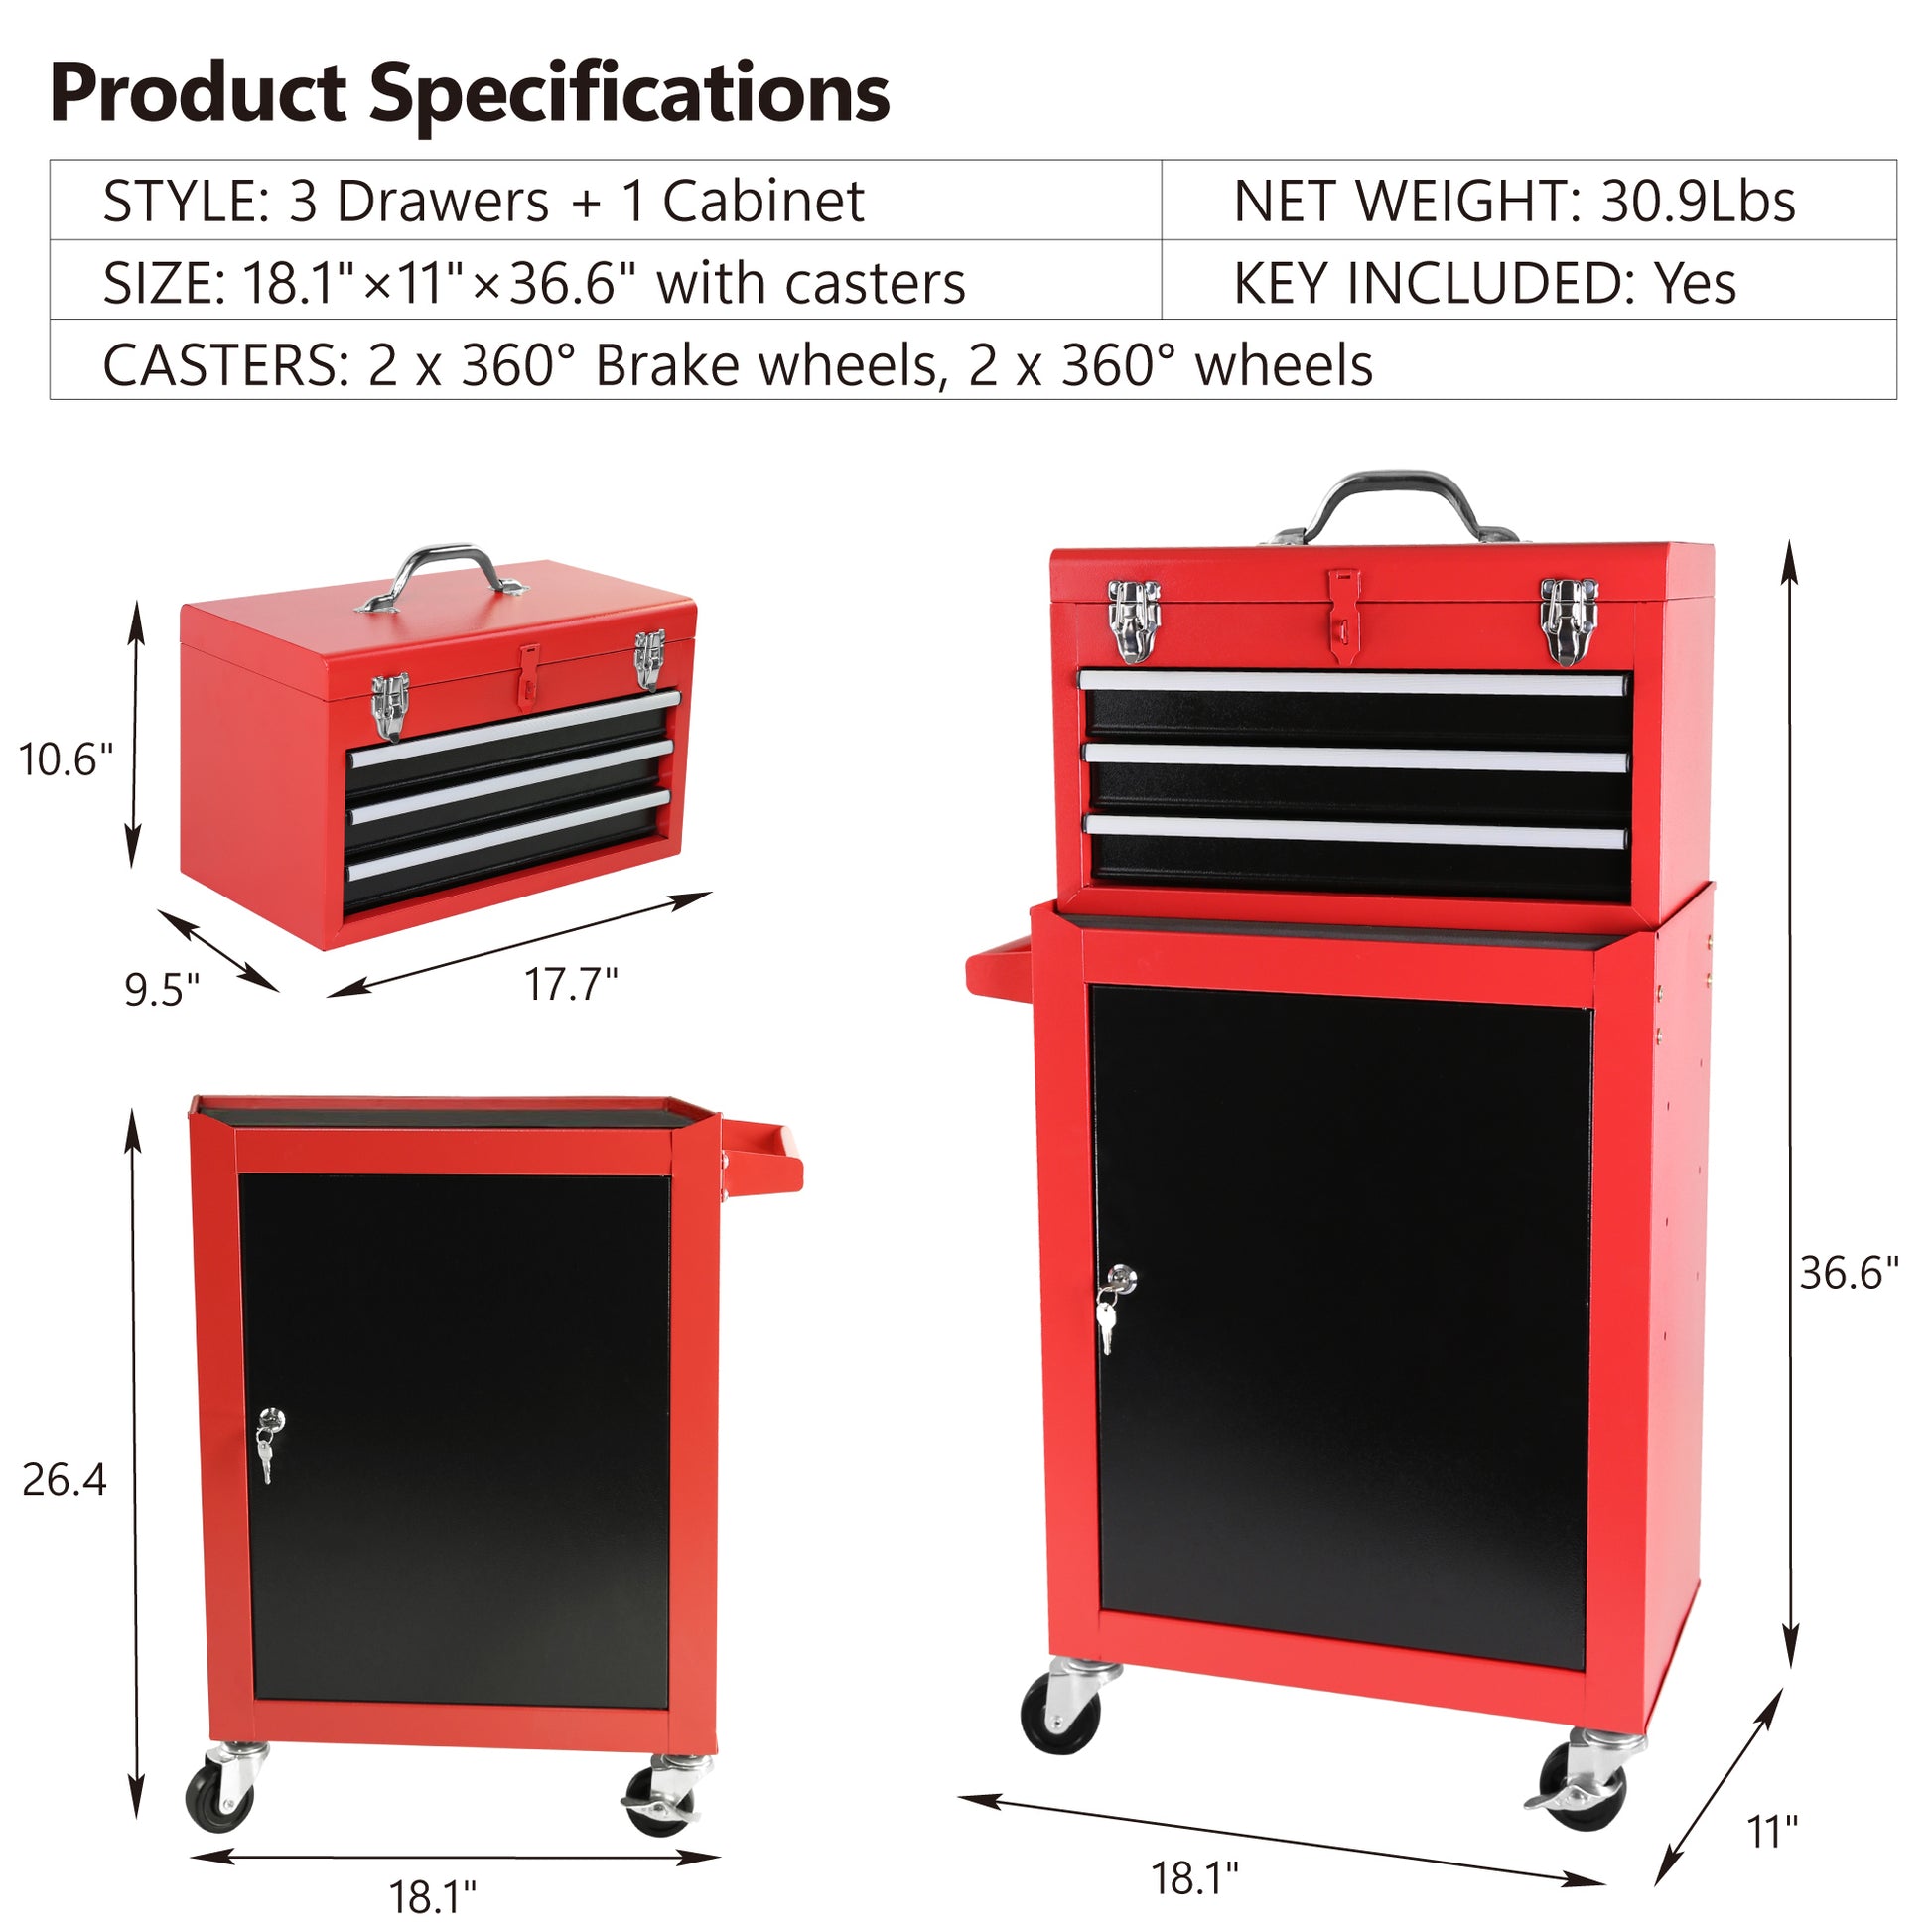 3 Drawer Rolling Tool Chest with Wheels, Tool Chest red-steel